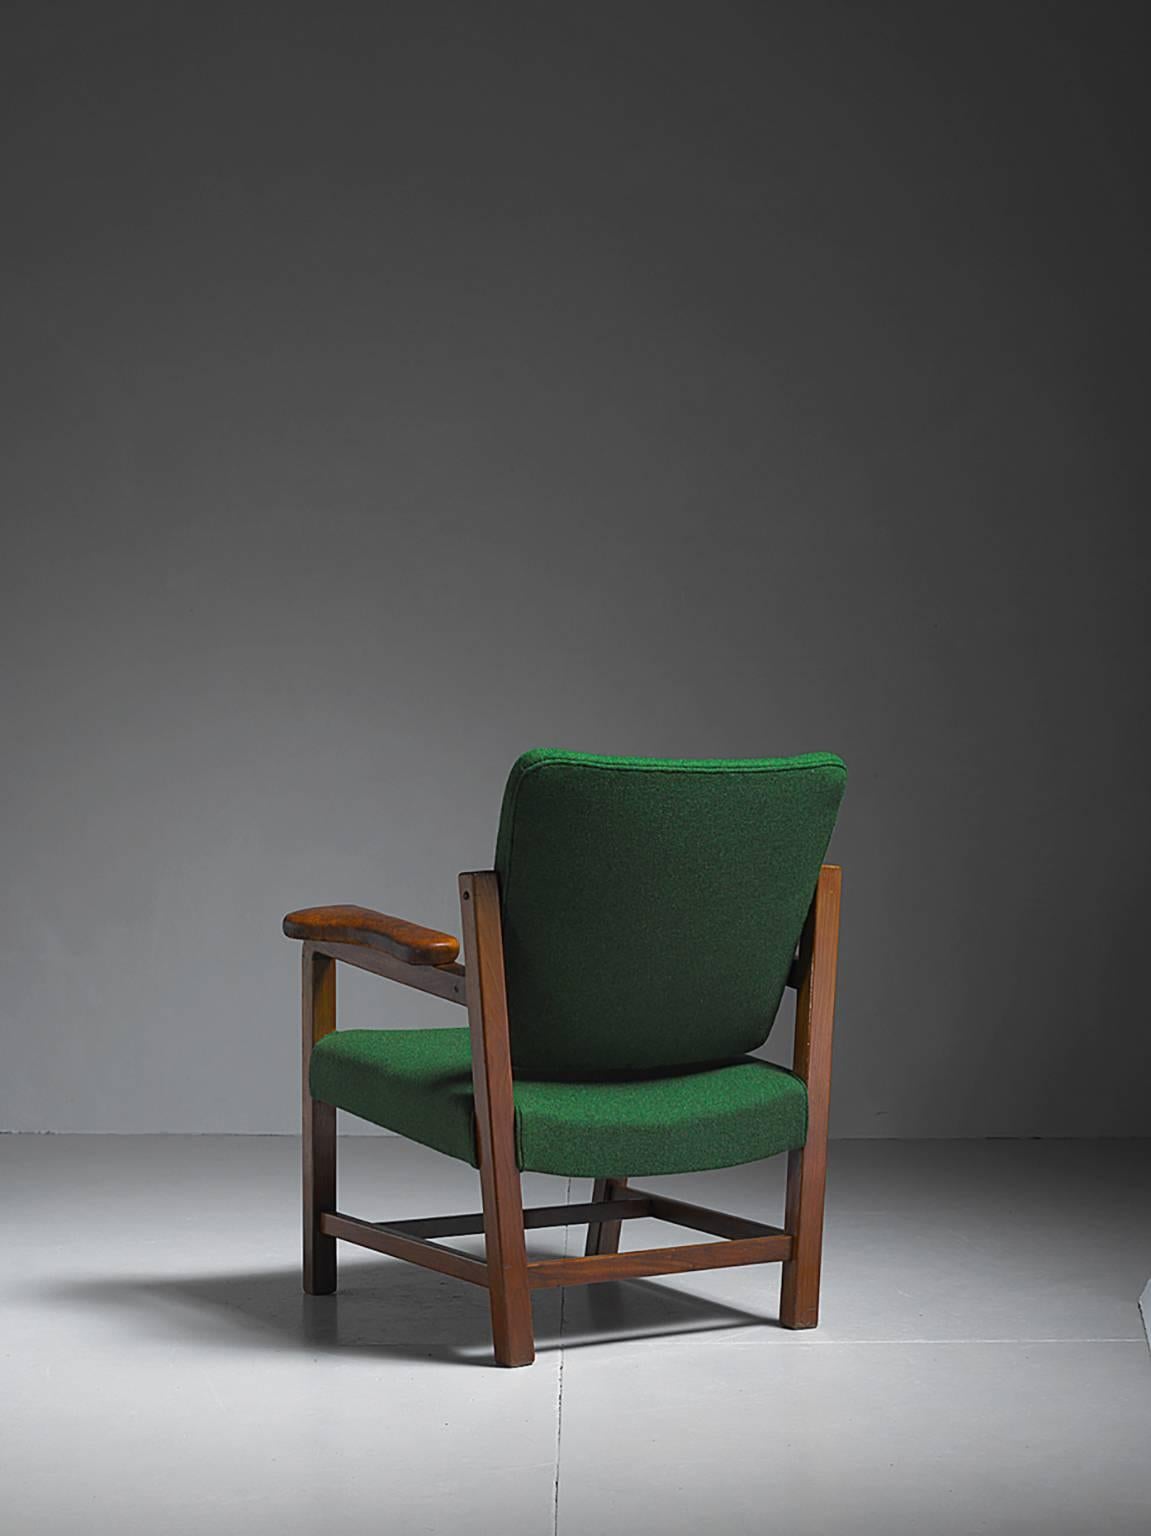 Scandinavian Modern Flemming Teisen Mahogany Chair with Leather Armrests, Denmark, 1939 For Sale